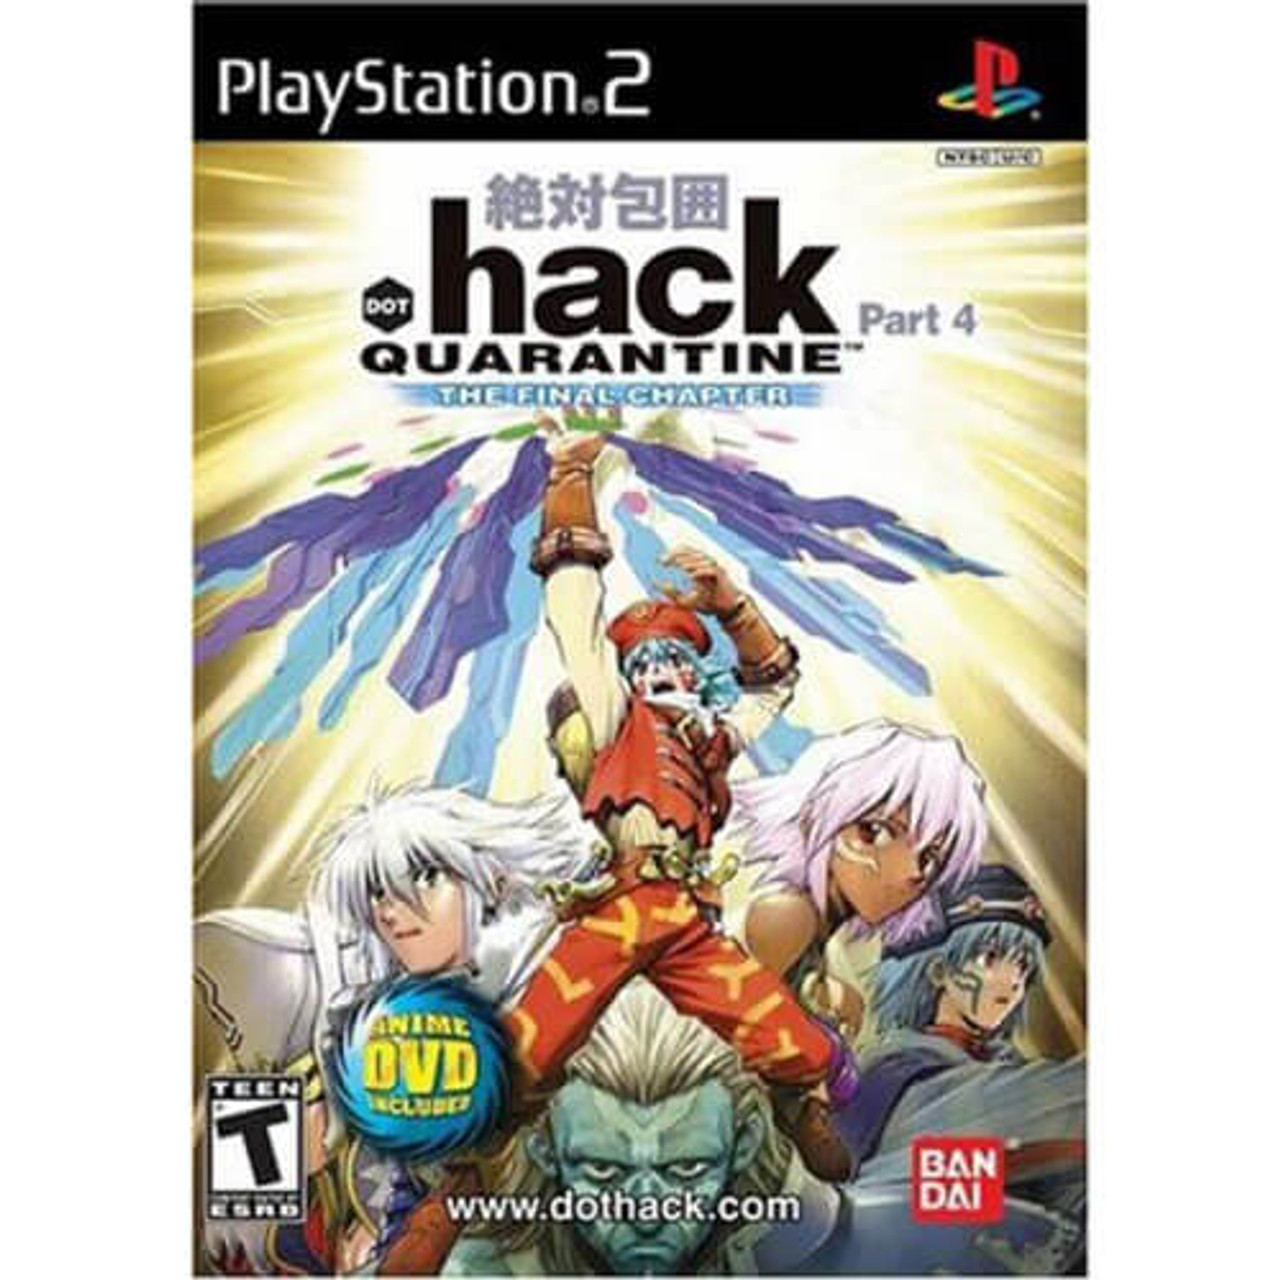 Play It! Games, Movies & Music - Hey PS2 Game Collectors! Play It! North  High Street has a copy of Dot Hack Part 4 Quarantine The Final Chapter that  includes the case